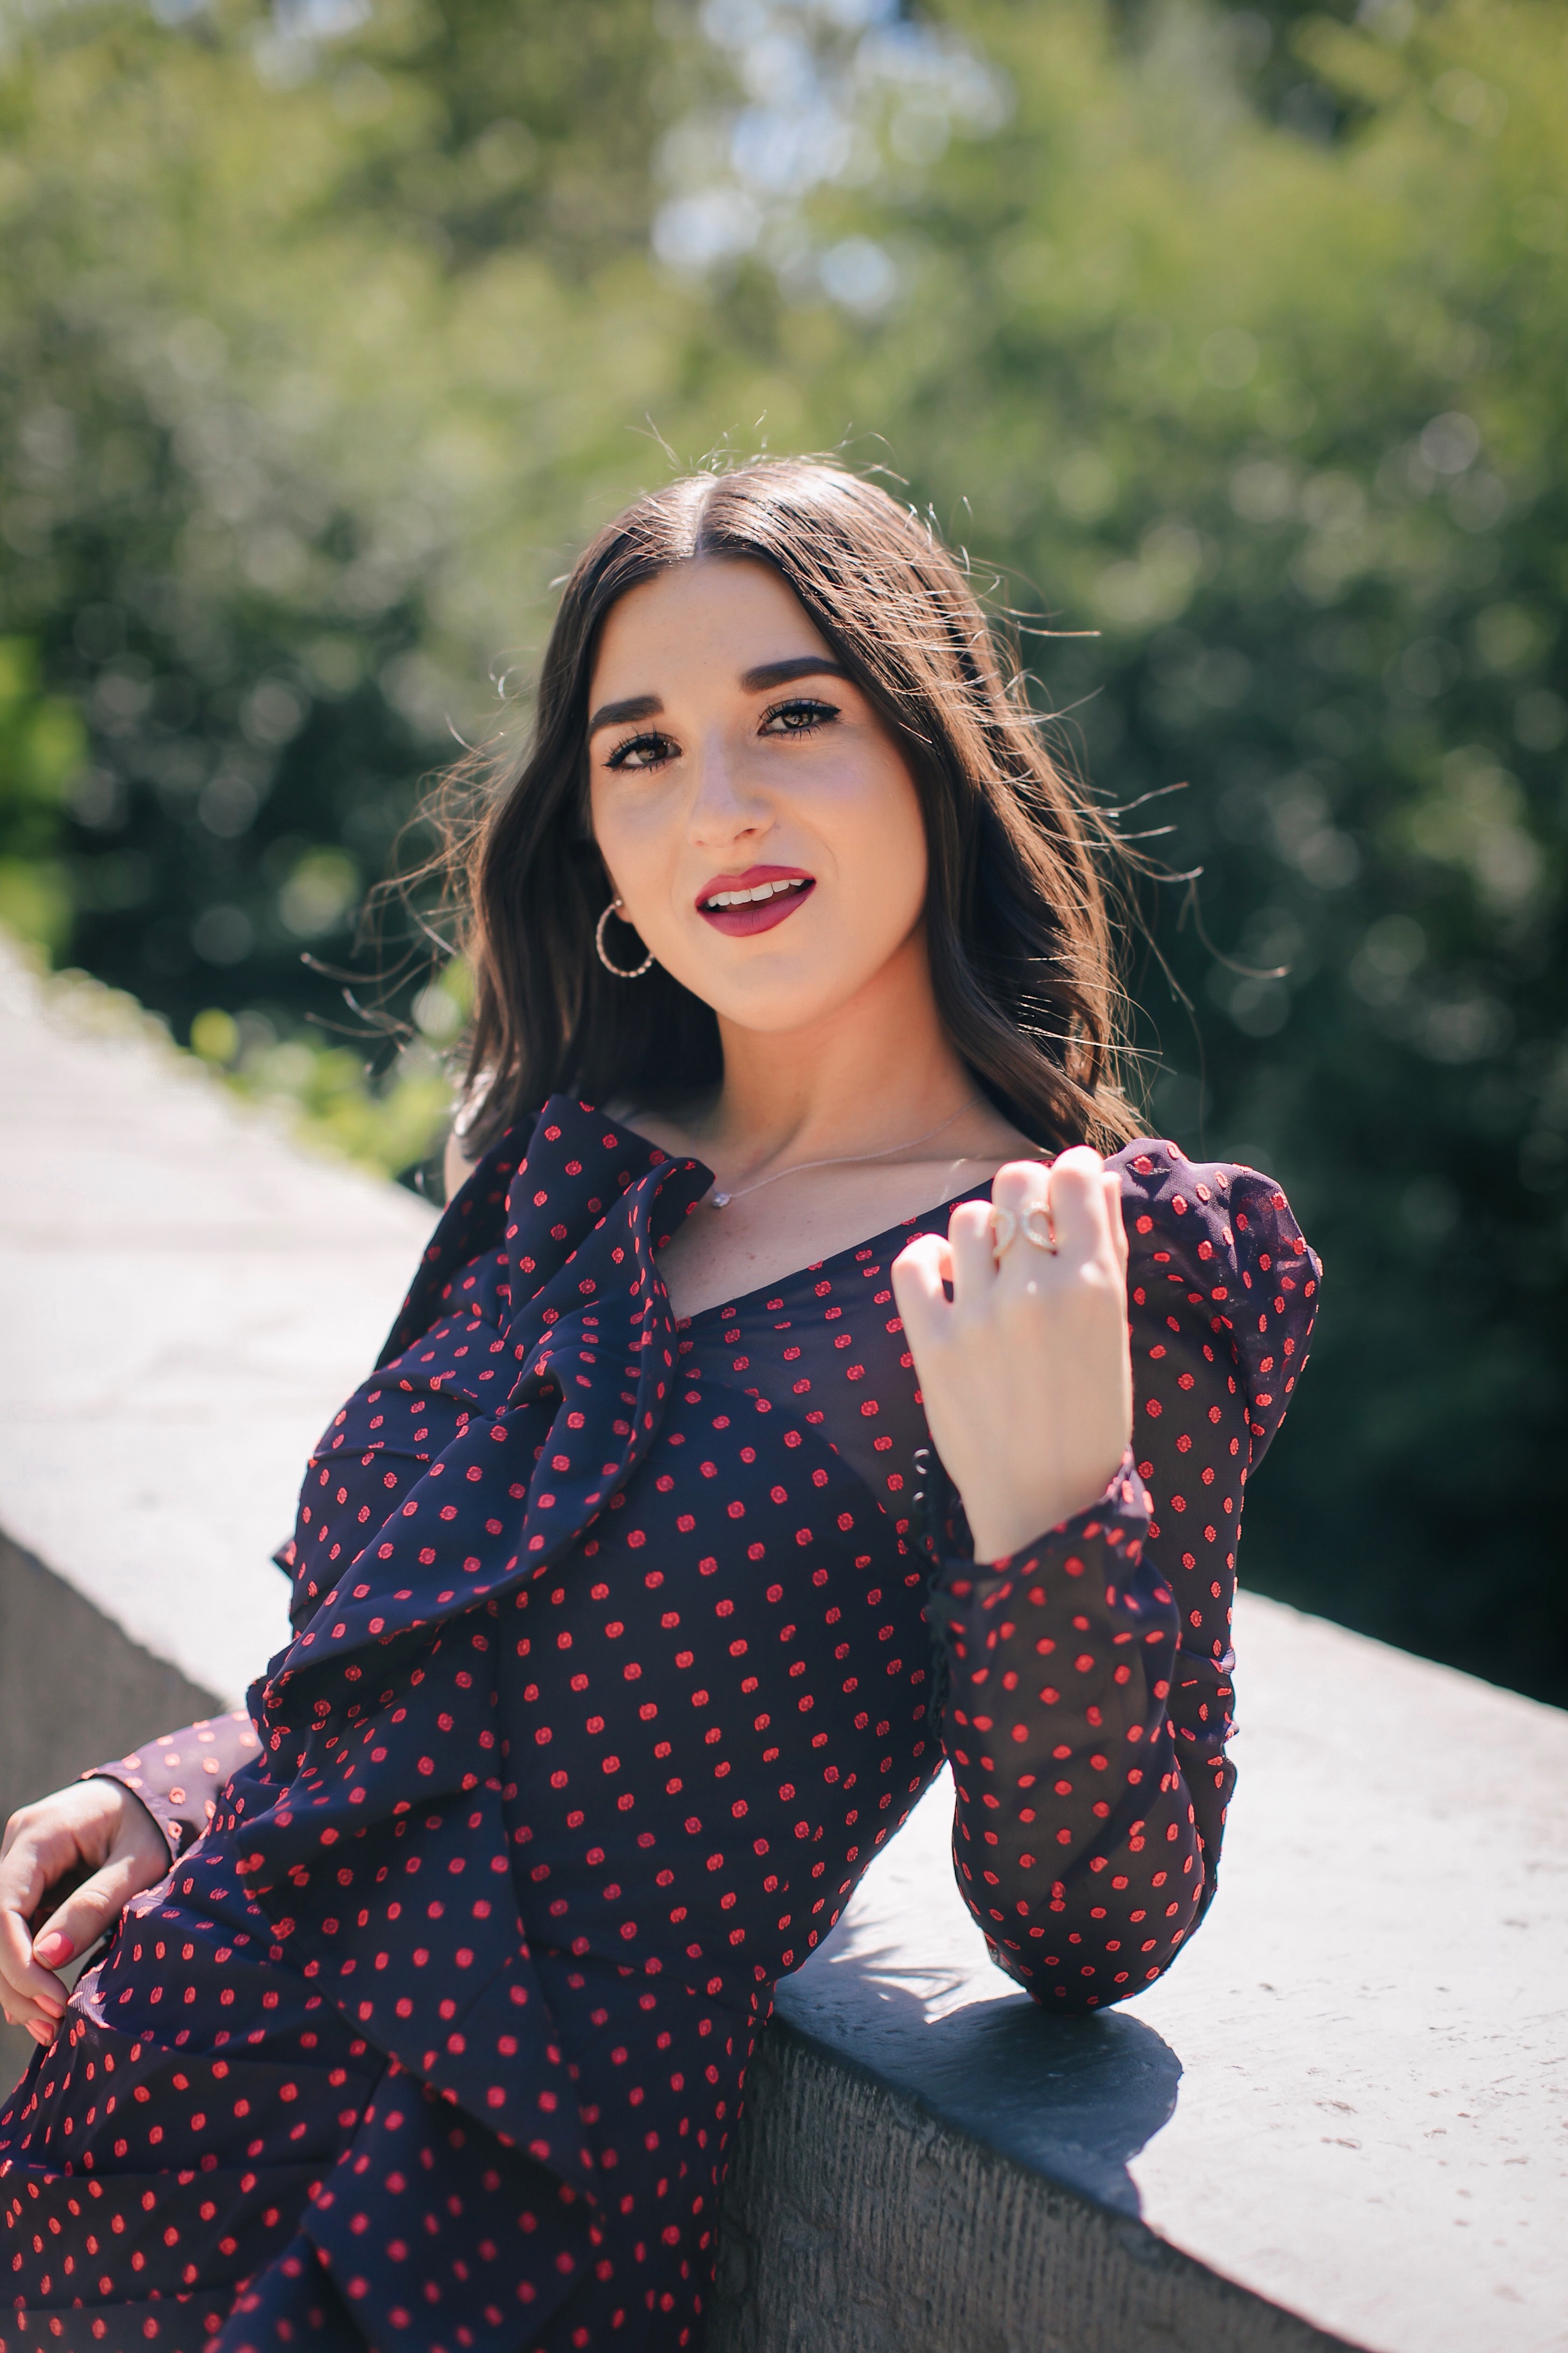 Aging Out Cold Shoulder Polka Dot Dress Silver Heels Esther Santer Fashion Blog NYC Street Style Blogger Outfit OOTD Trendy Shopping Girl What How To Wear Industry Diamond Jewelry Self Portait Central Park Gapstow Bridge Photoshoot Red Lip Summer Love.JPG